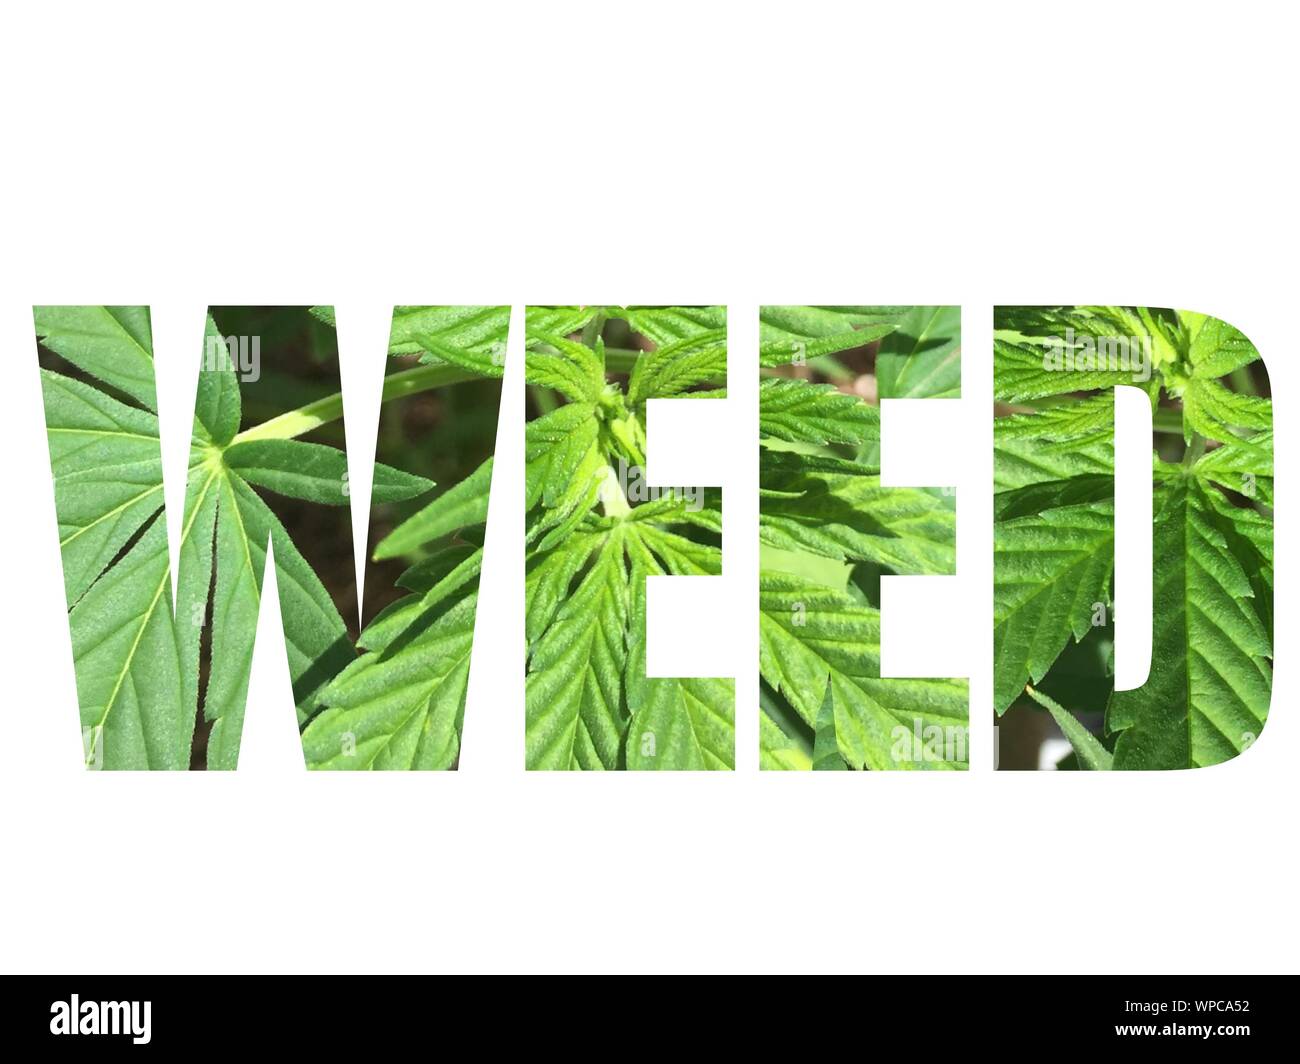 Weed typography with marijuana leaves in the text Stock Photo